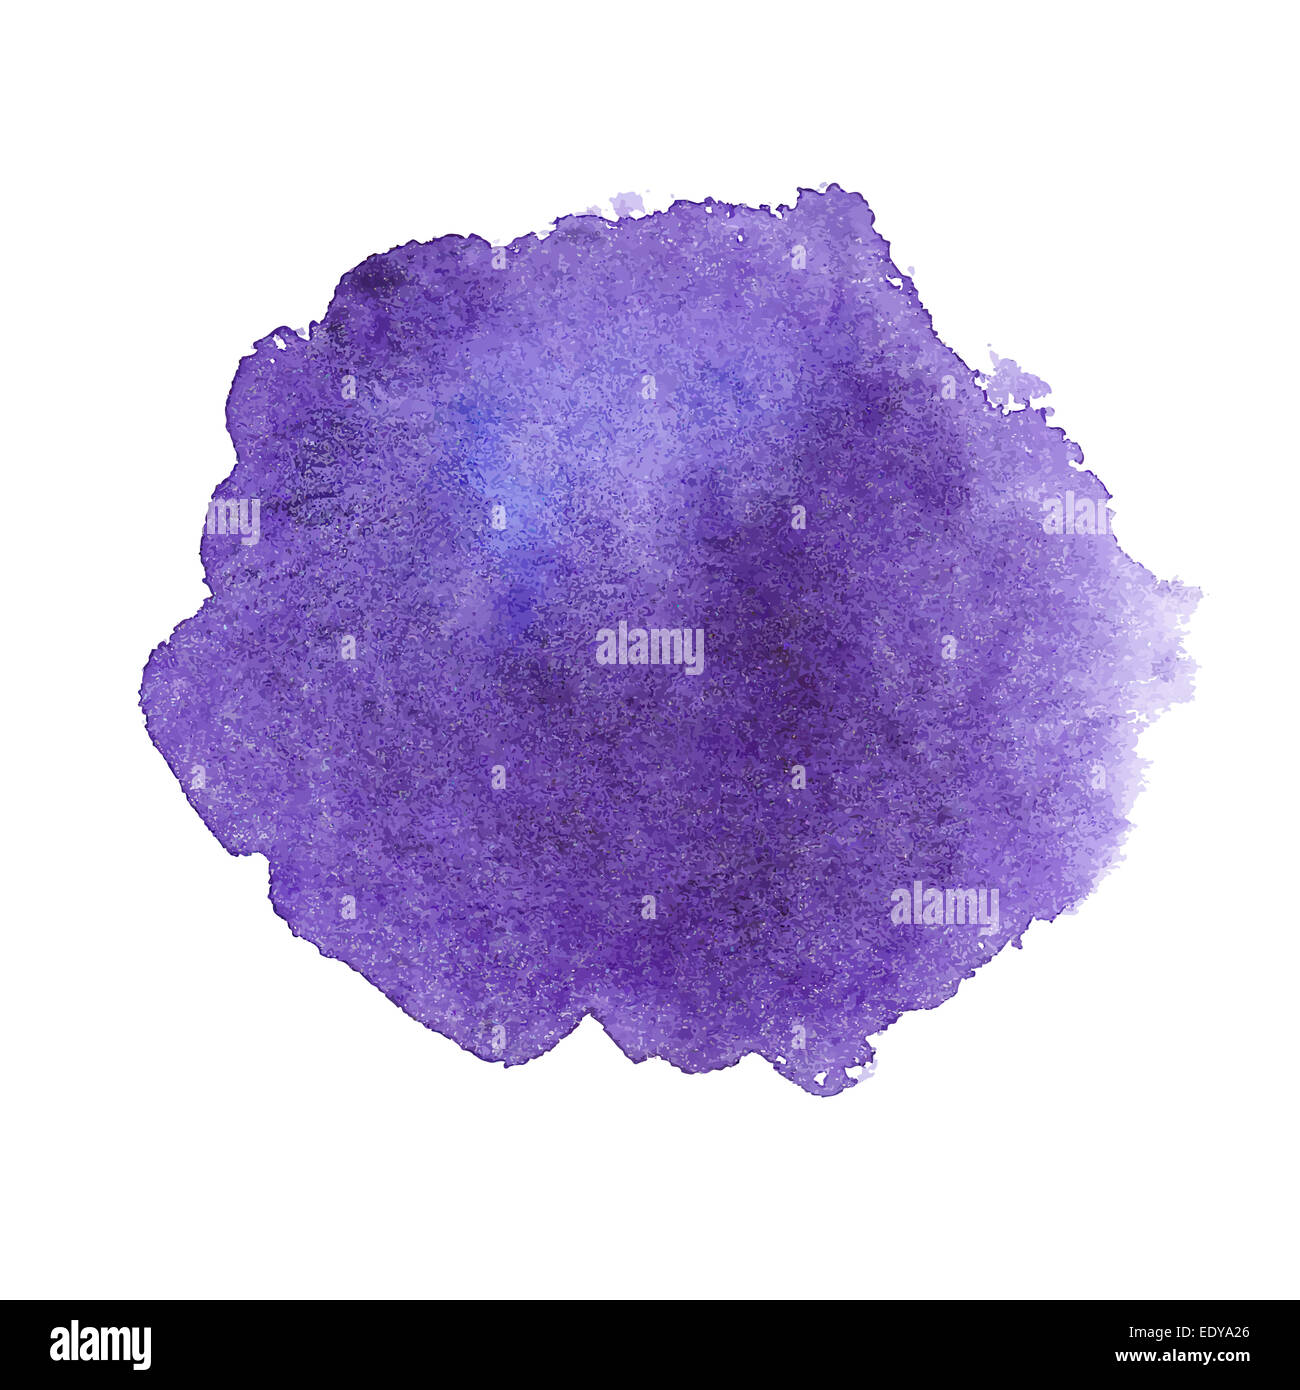 Premium Photo  Purple and white watercolor paint splatters on a